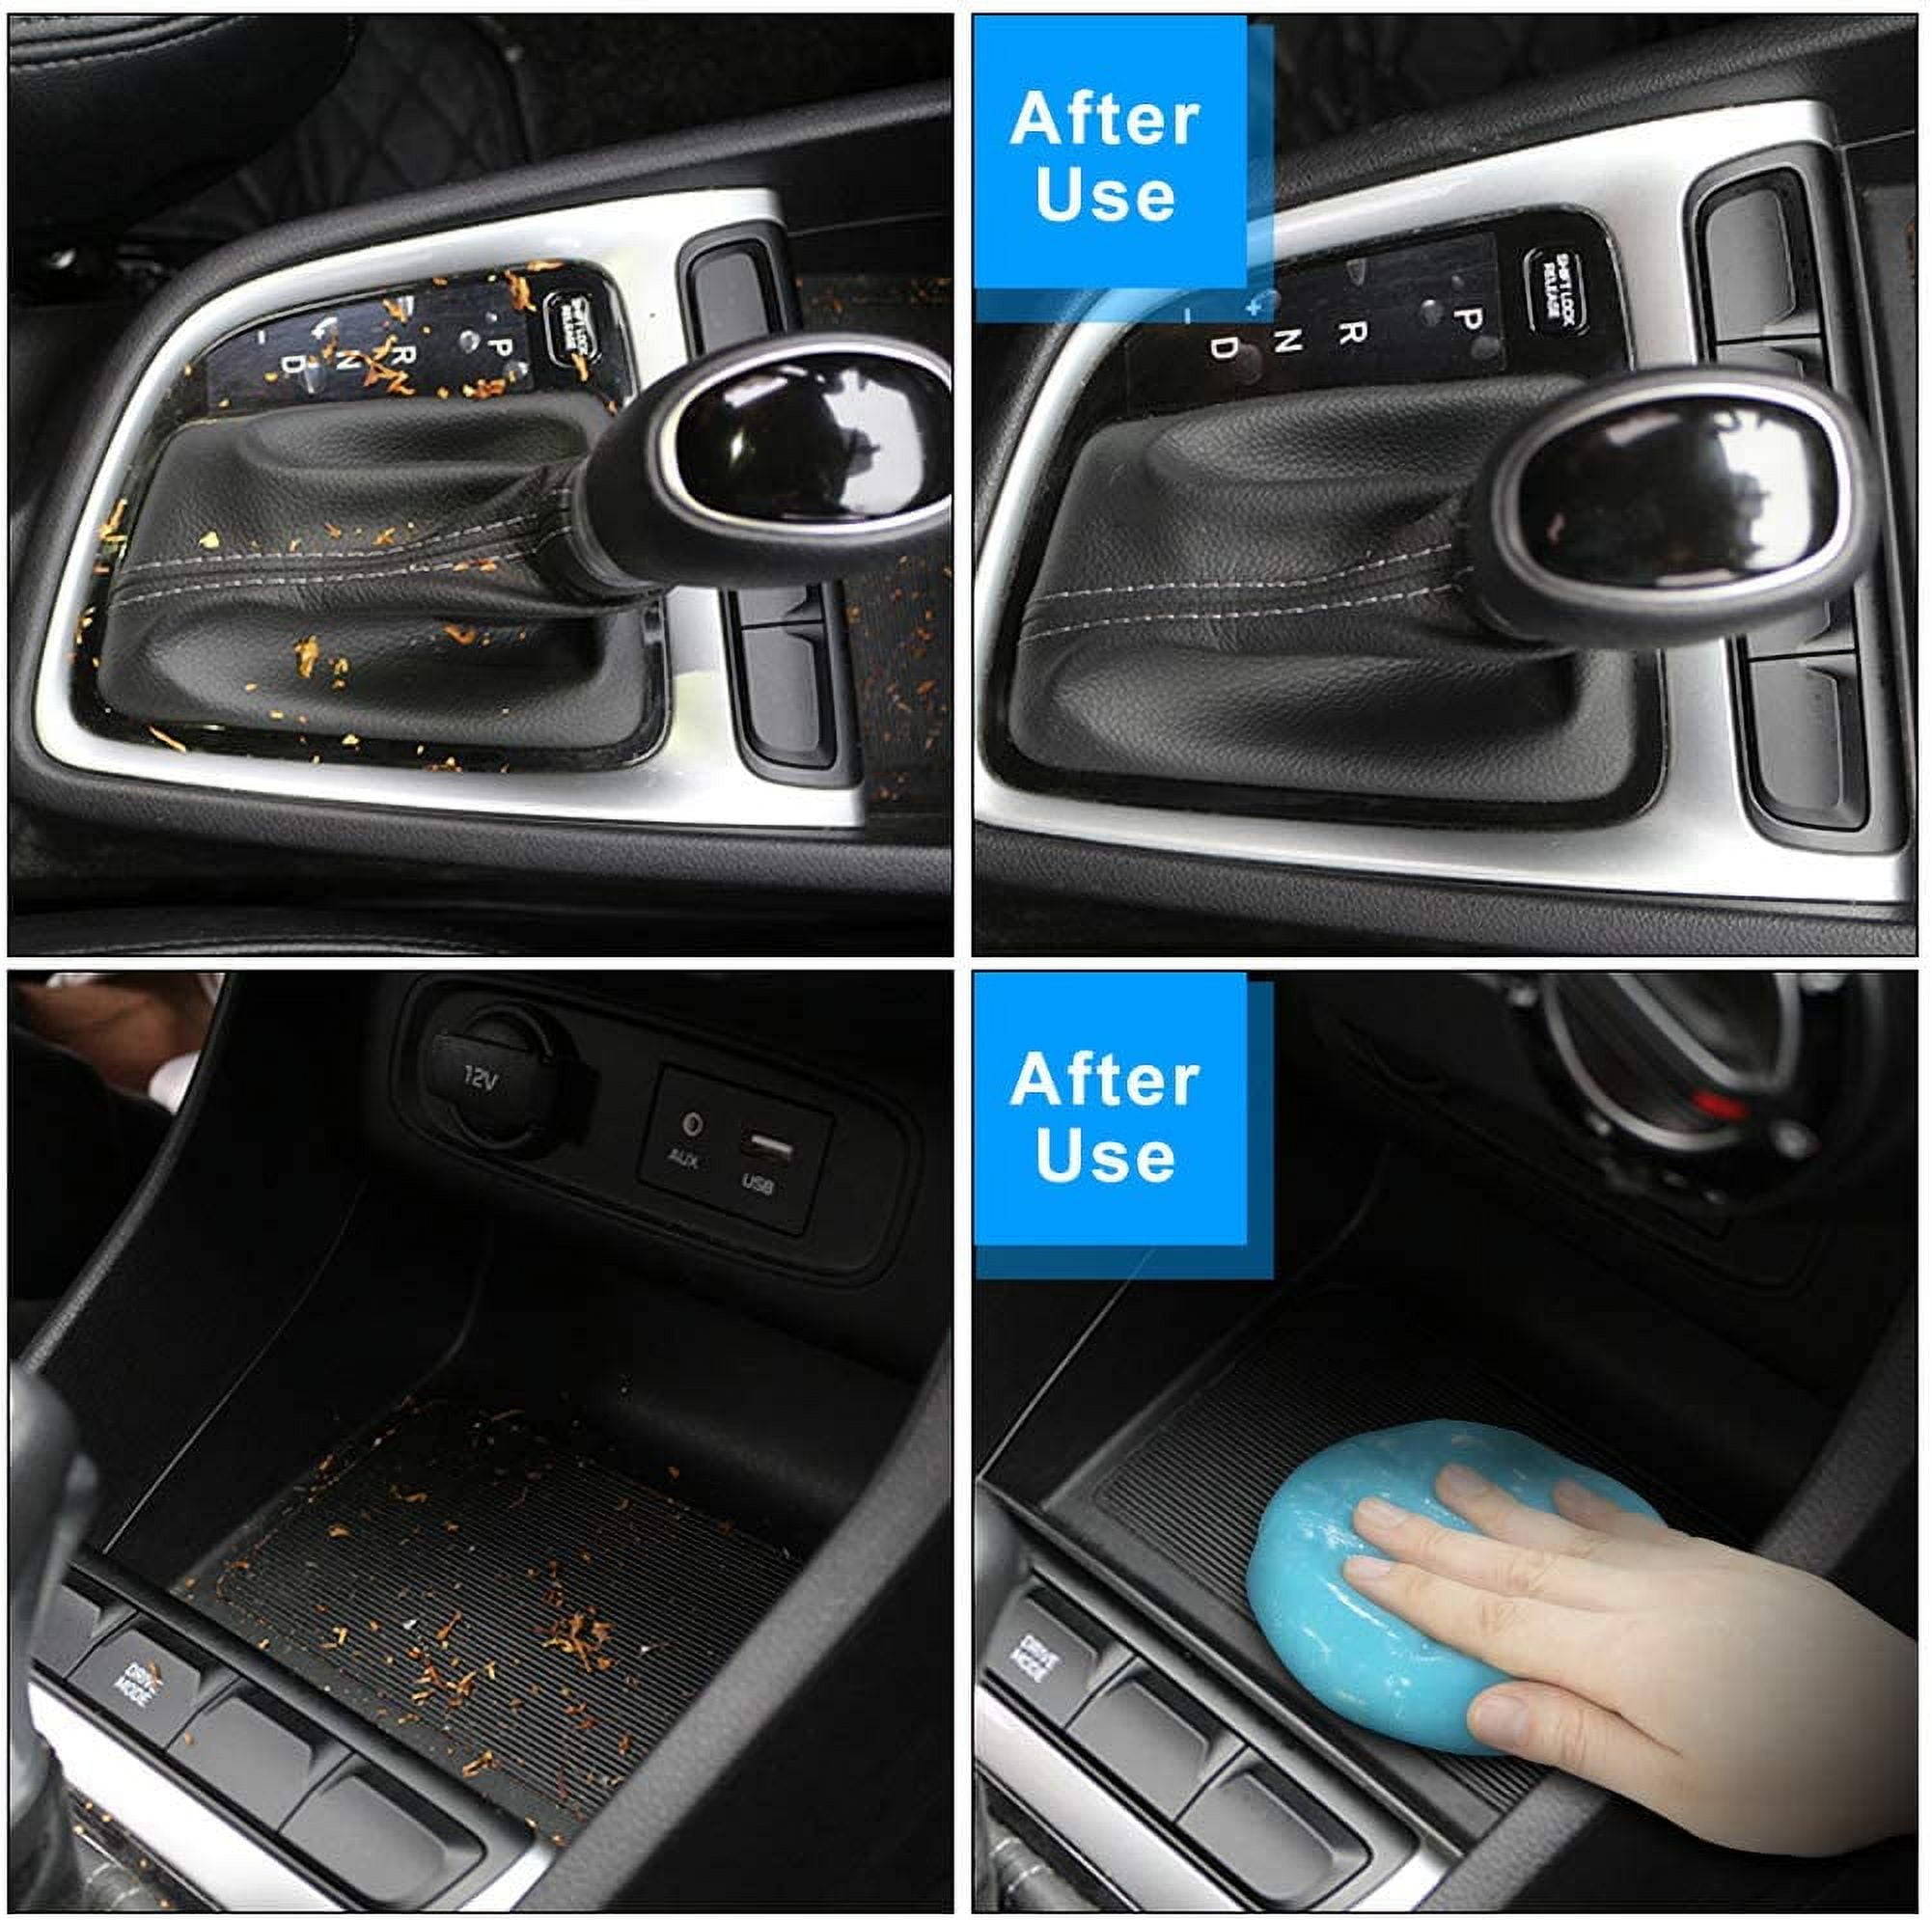 TICARVE Car Cleaning Gel for Indoor Use, Soft and Flexible Keyboard  Cleaner, Dust Protection Adhesive Eco-Friendly, Universal Dust Cleaner for  Cars